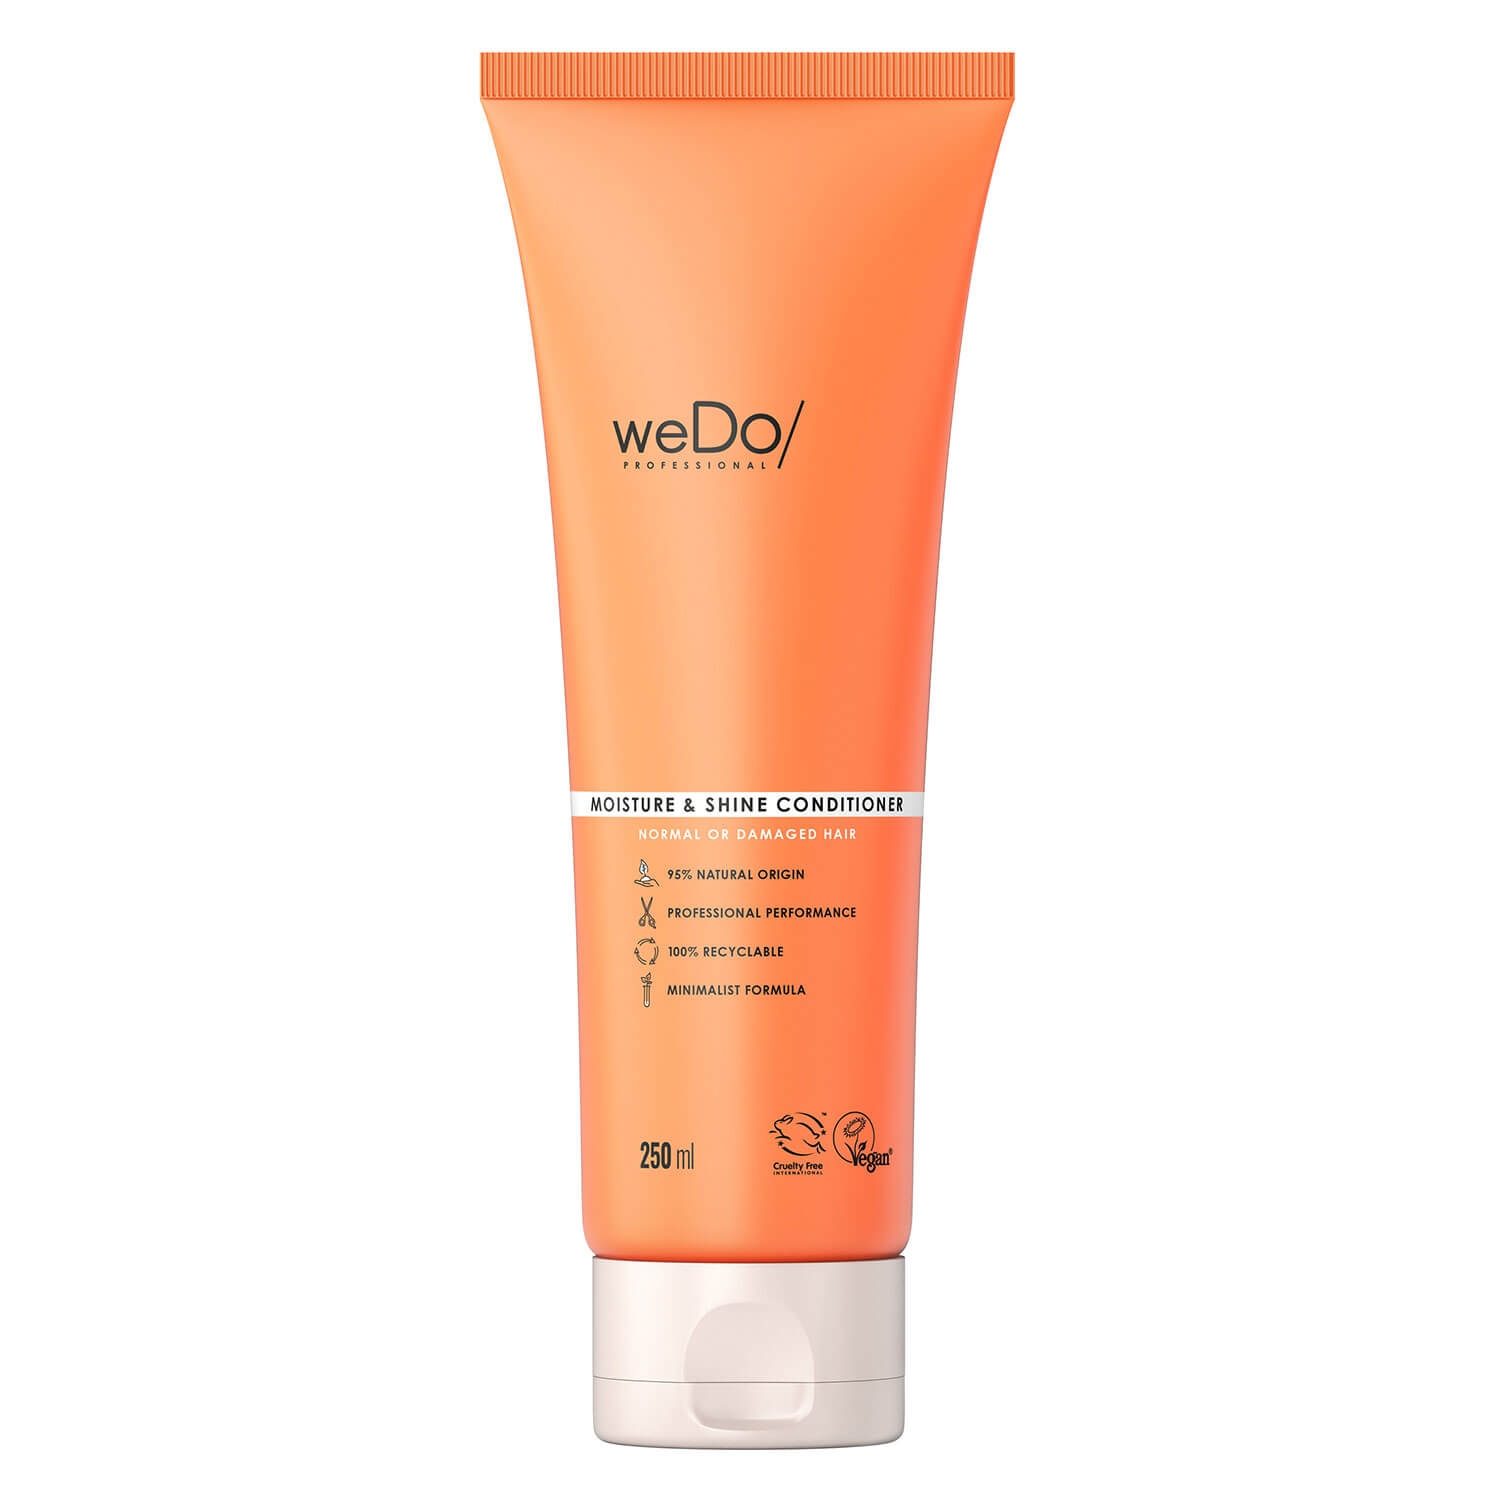 Product image from weDo/ - Moisture & Shine Conditioner